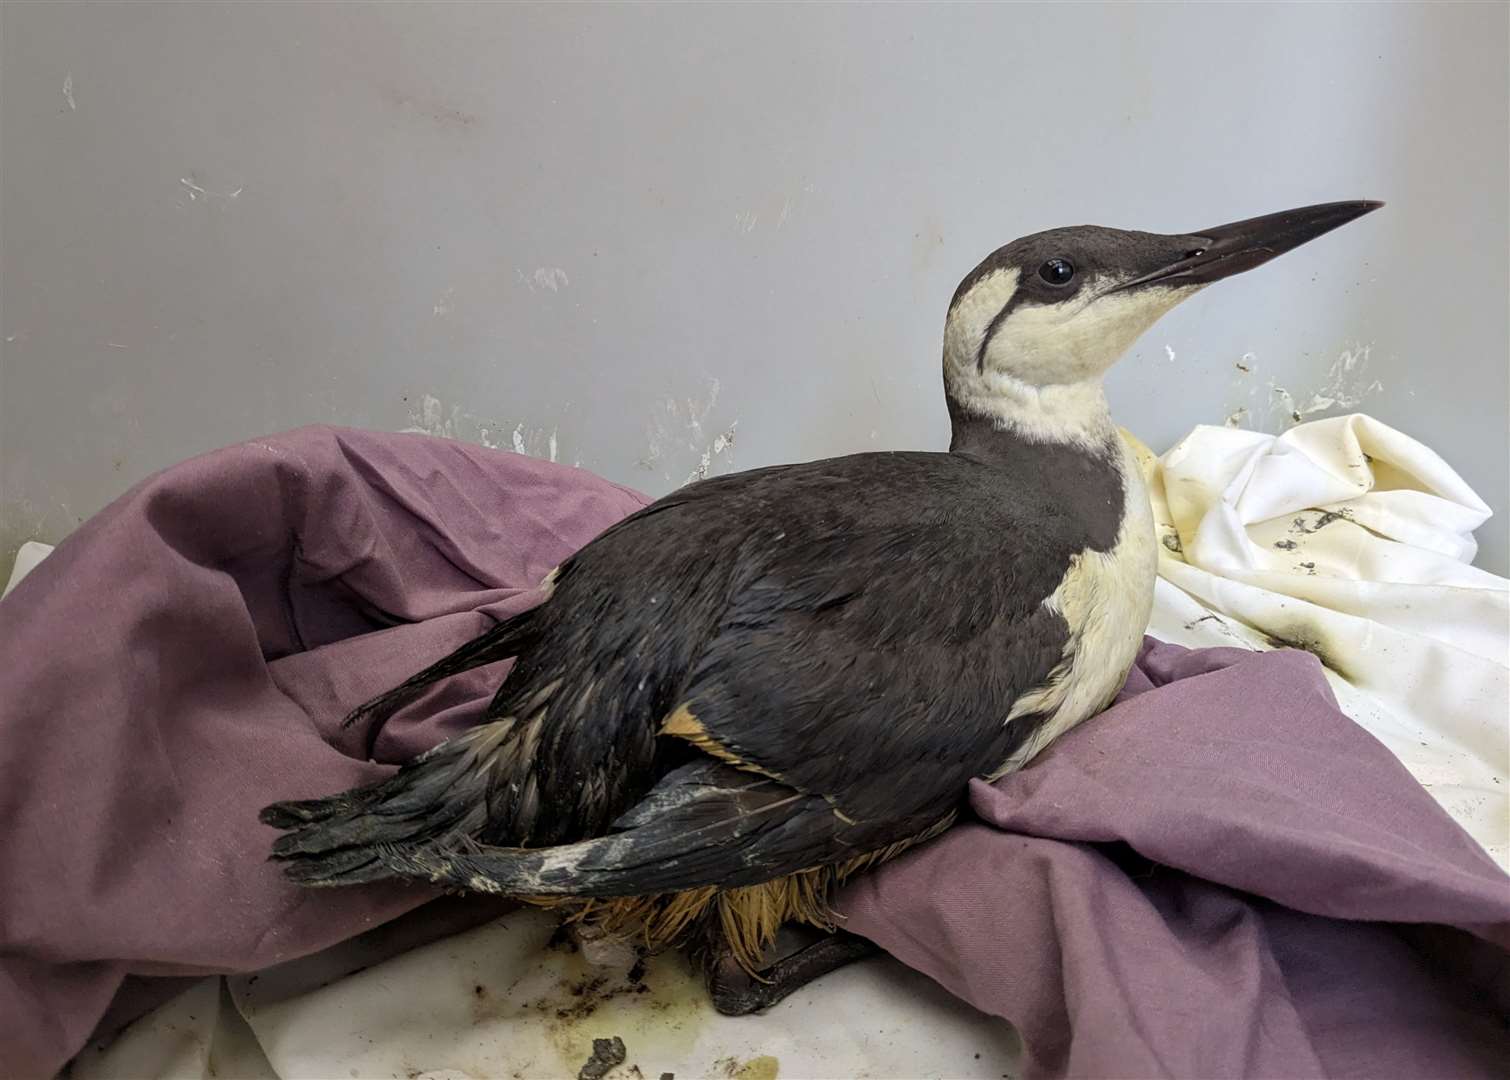 The birds are believed to have been affected by an oil spill off the coast of Hastings. Picture: RSPCA Mallydams